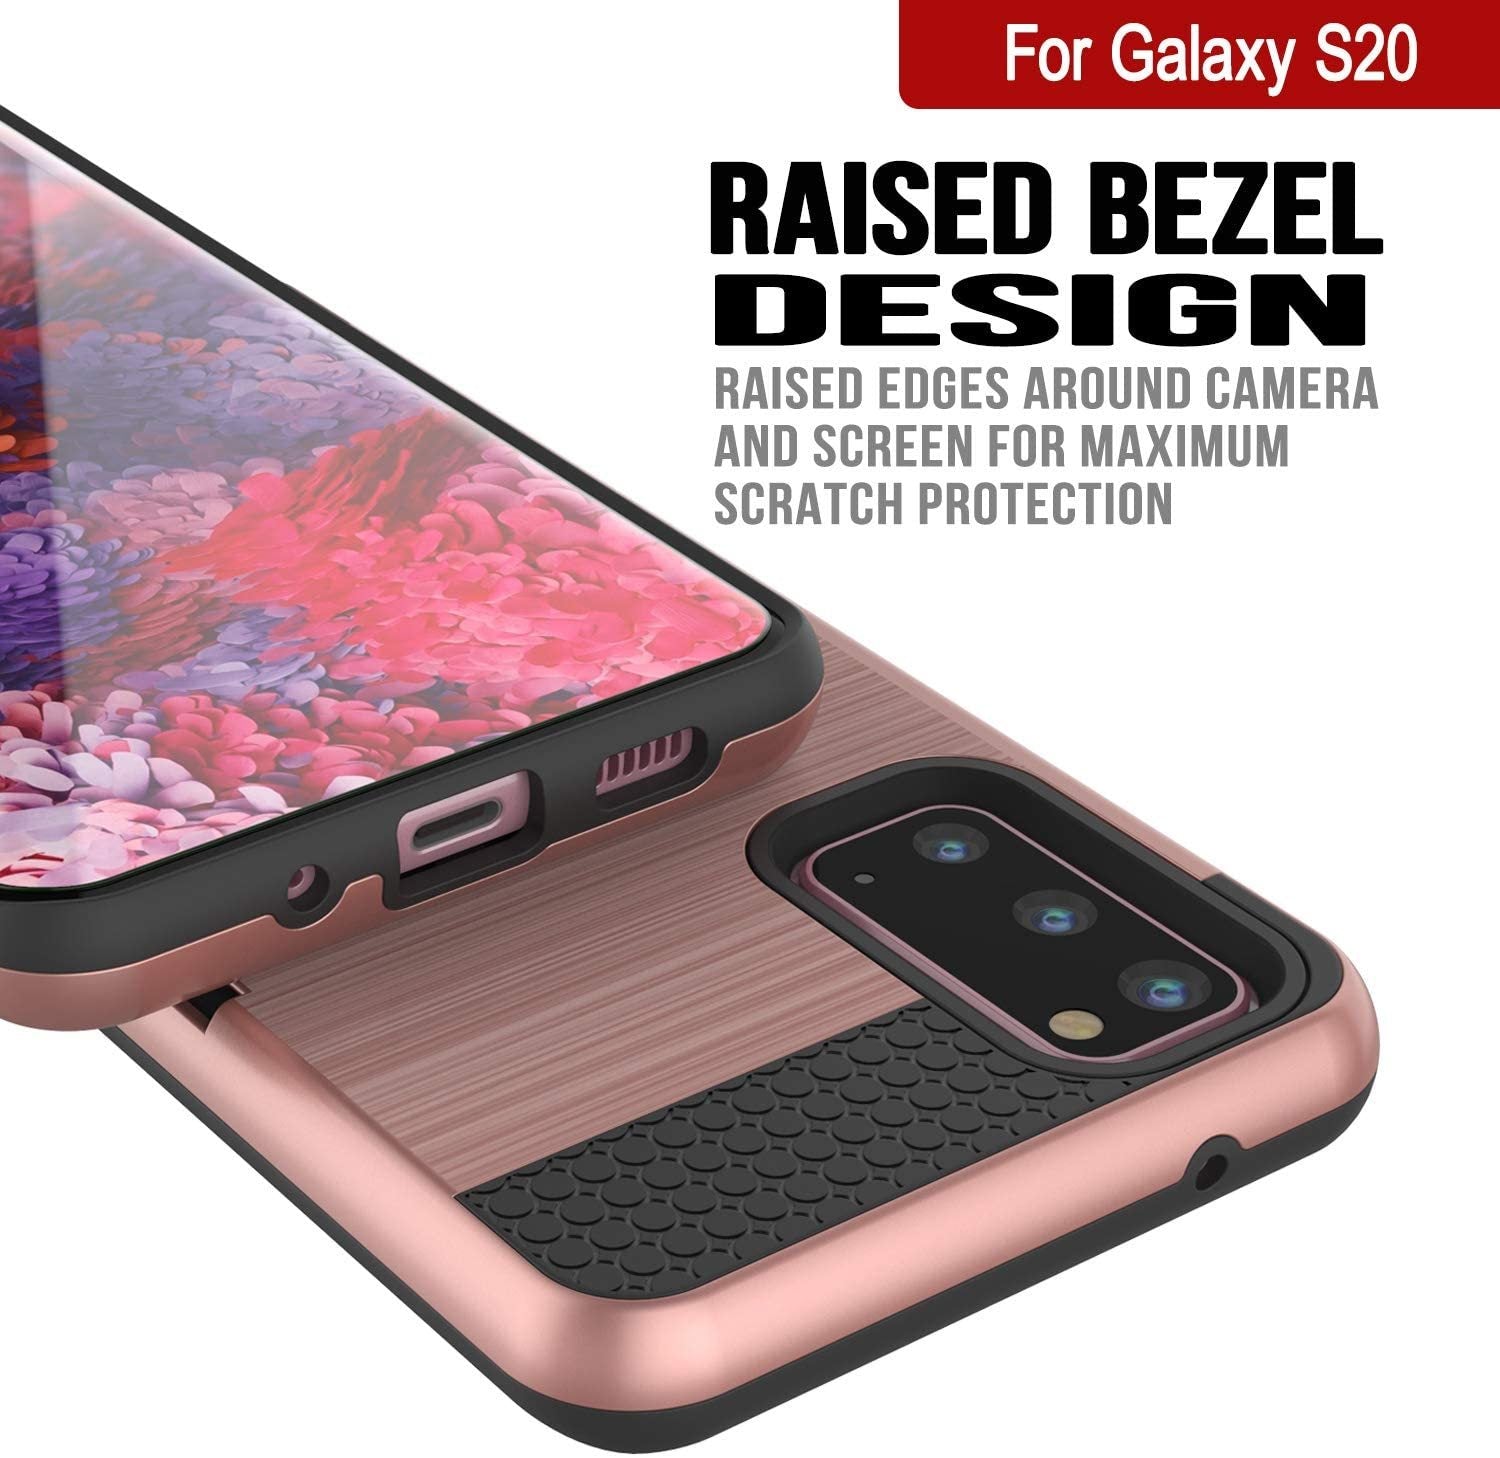 Galaxy S20 Case, PUNKcase [SLOT Series] [Slim Fit] Dual-Layer Armor Cover w/Integrated Anti-Shock System, Credit Card Slot [Rose Gold]